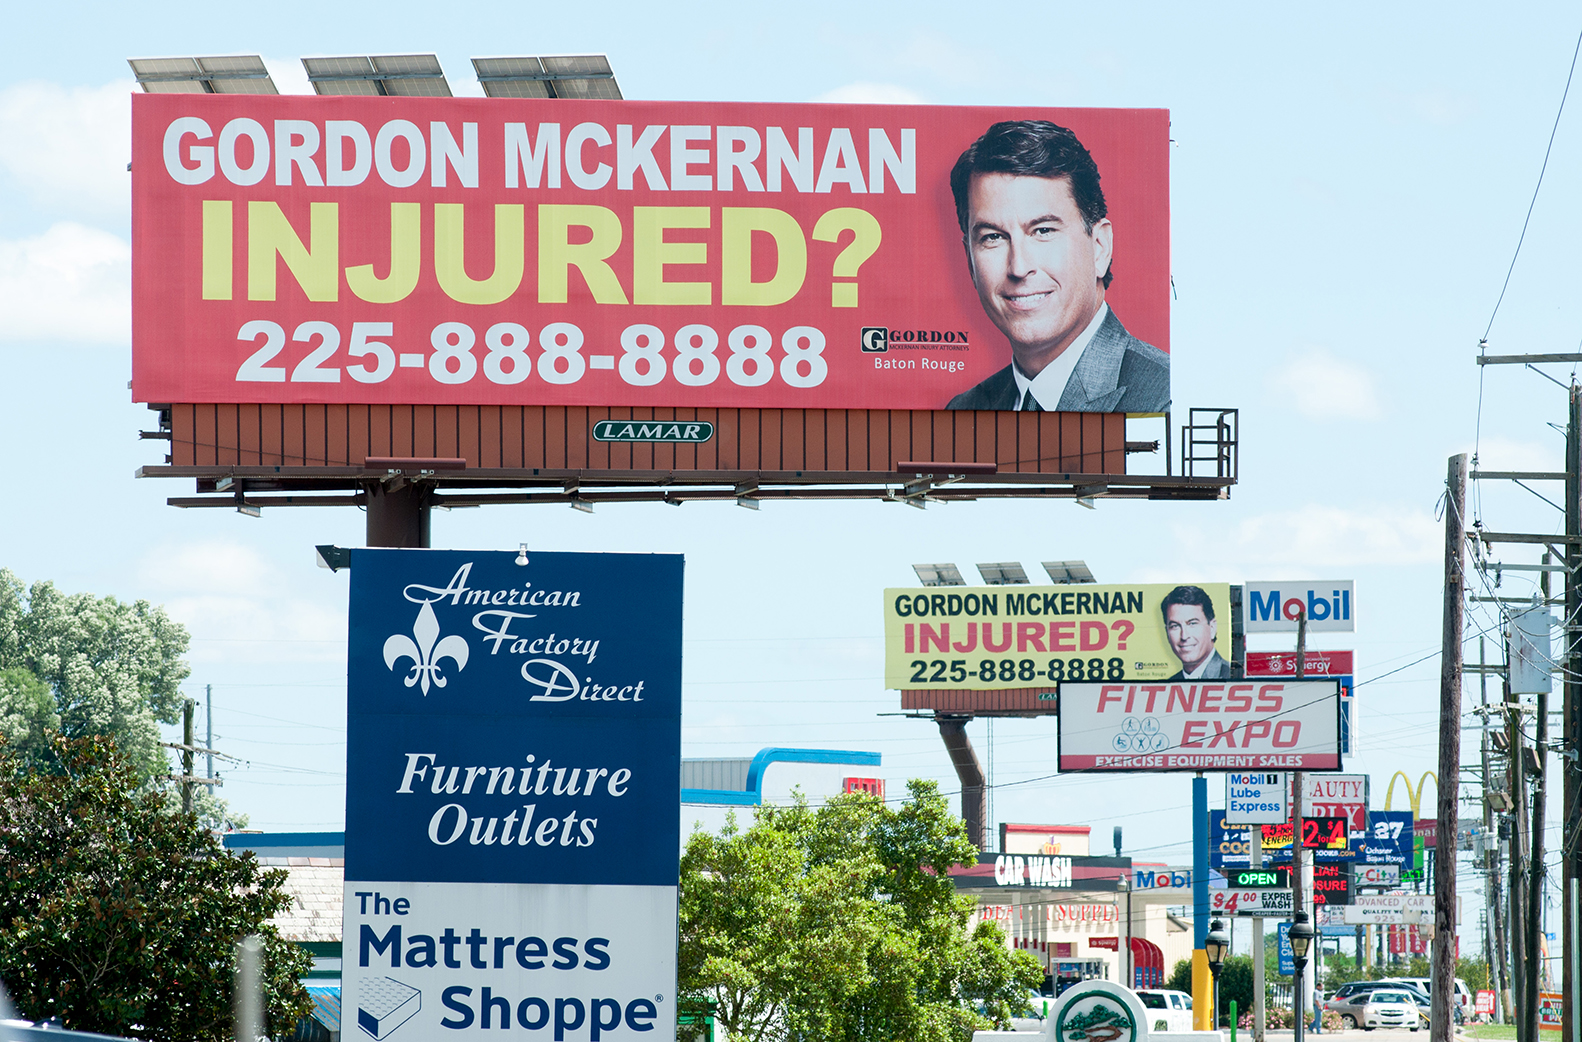 The Business Of Billboards Or Driver Distraction Baton